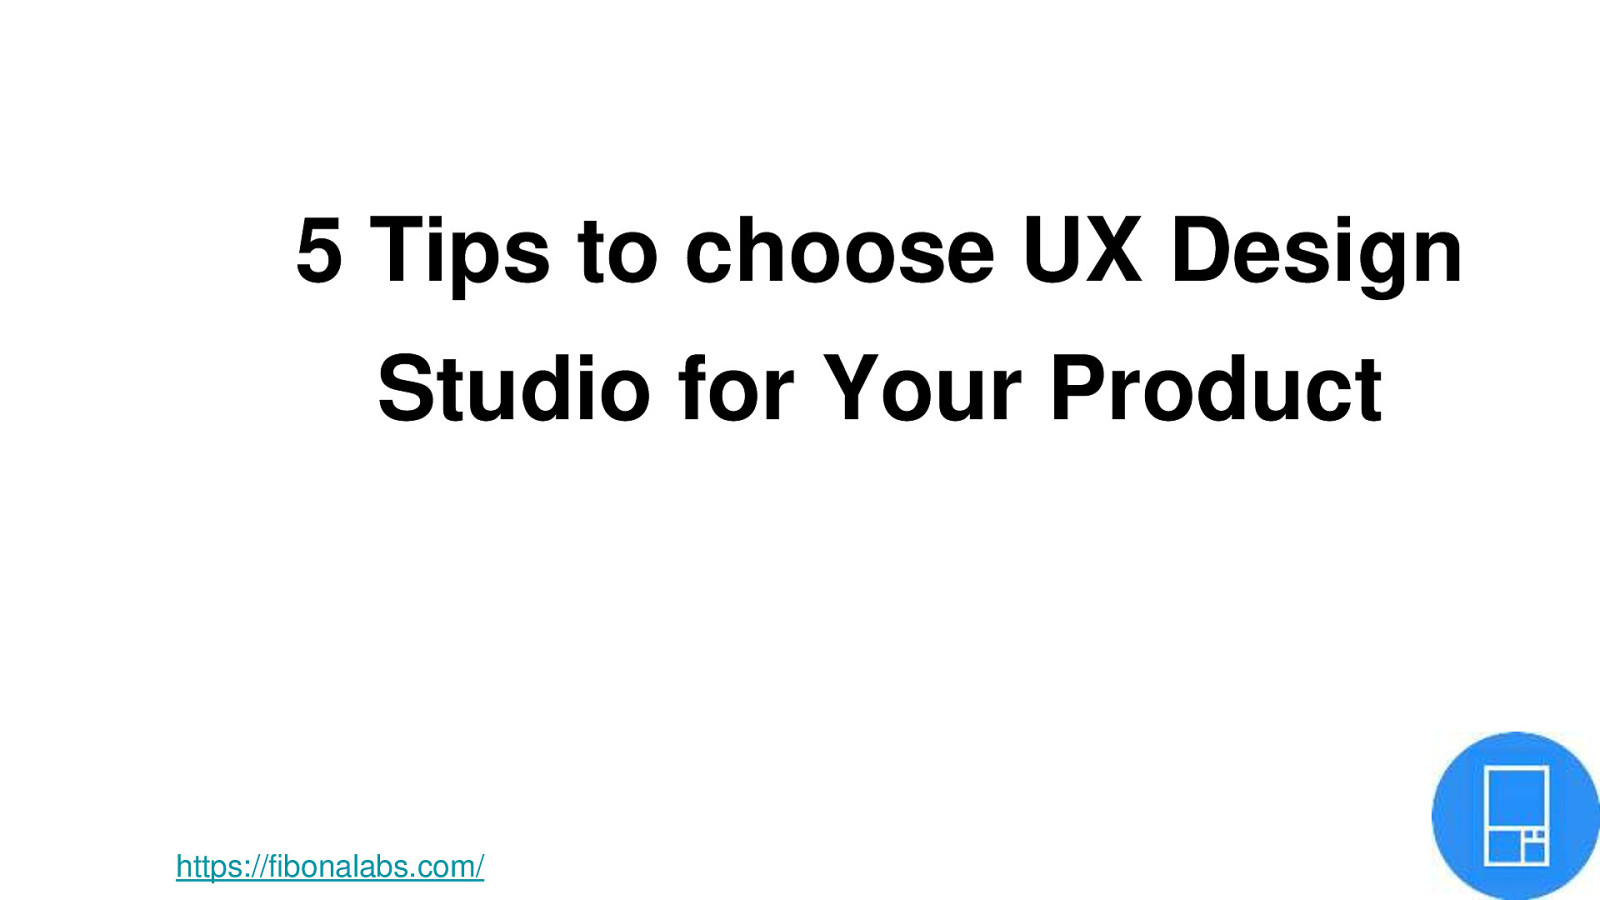 5 Tips to choose UX Design Studio for Your Product